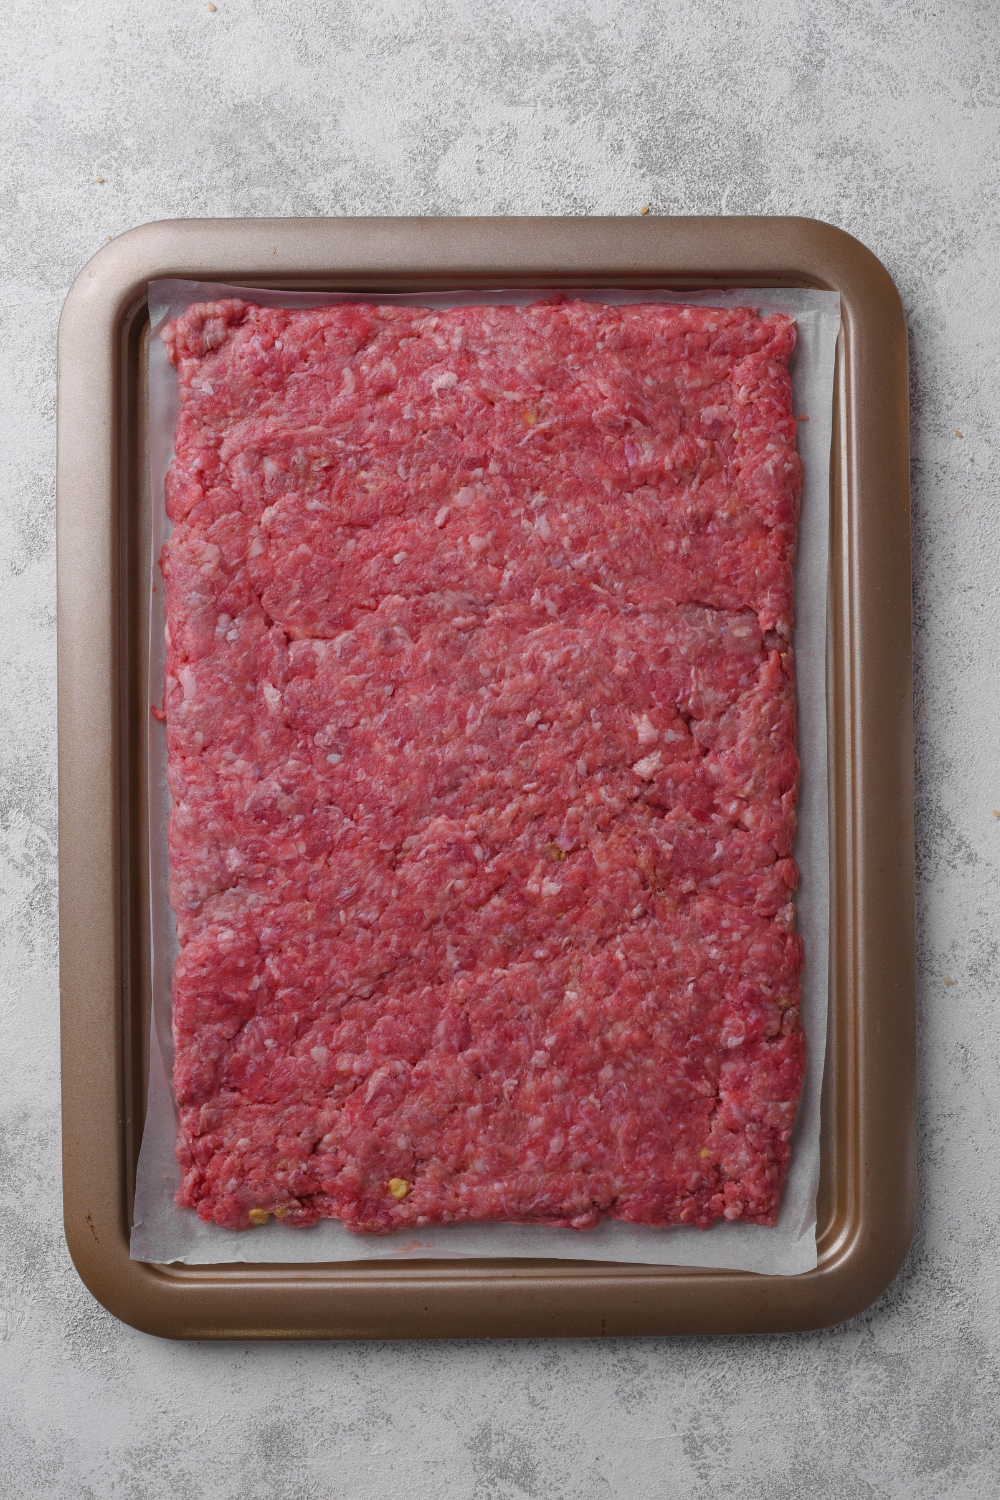 Ground hamburger is spread over a baking tray lined with parchment paper.